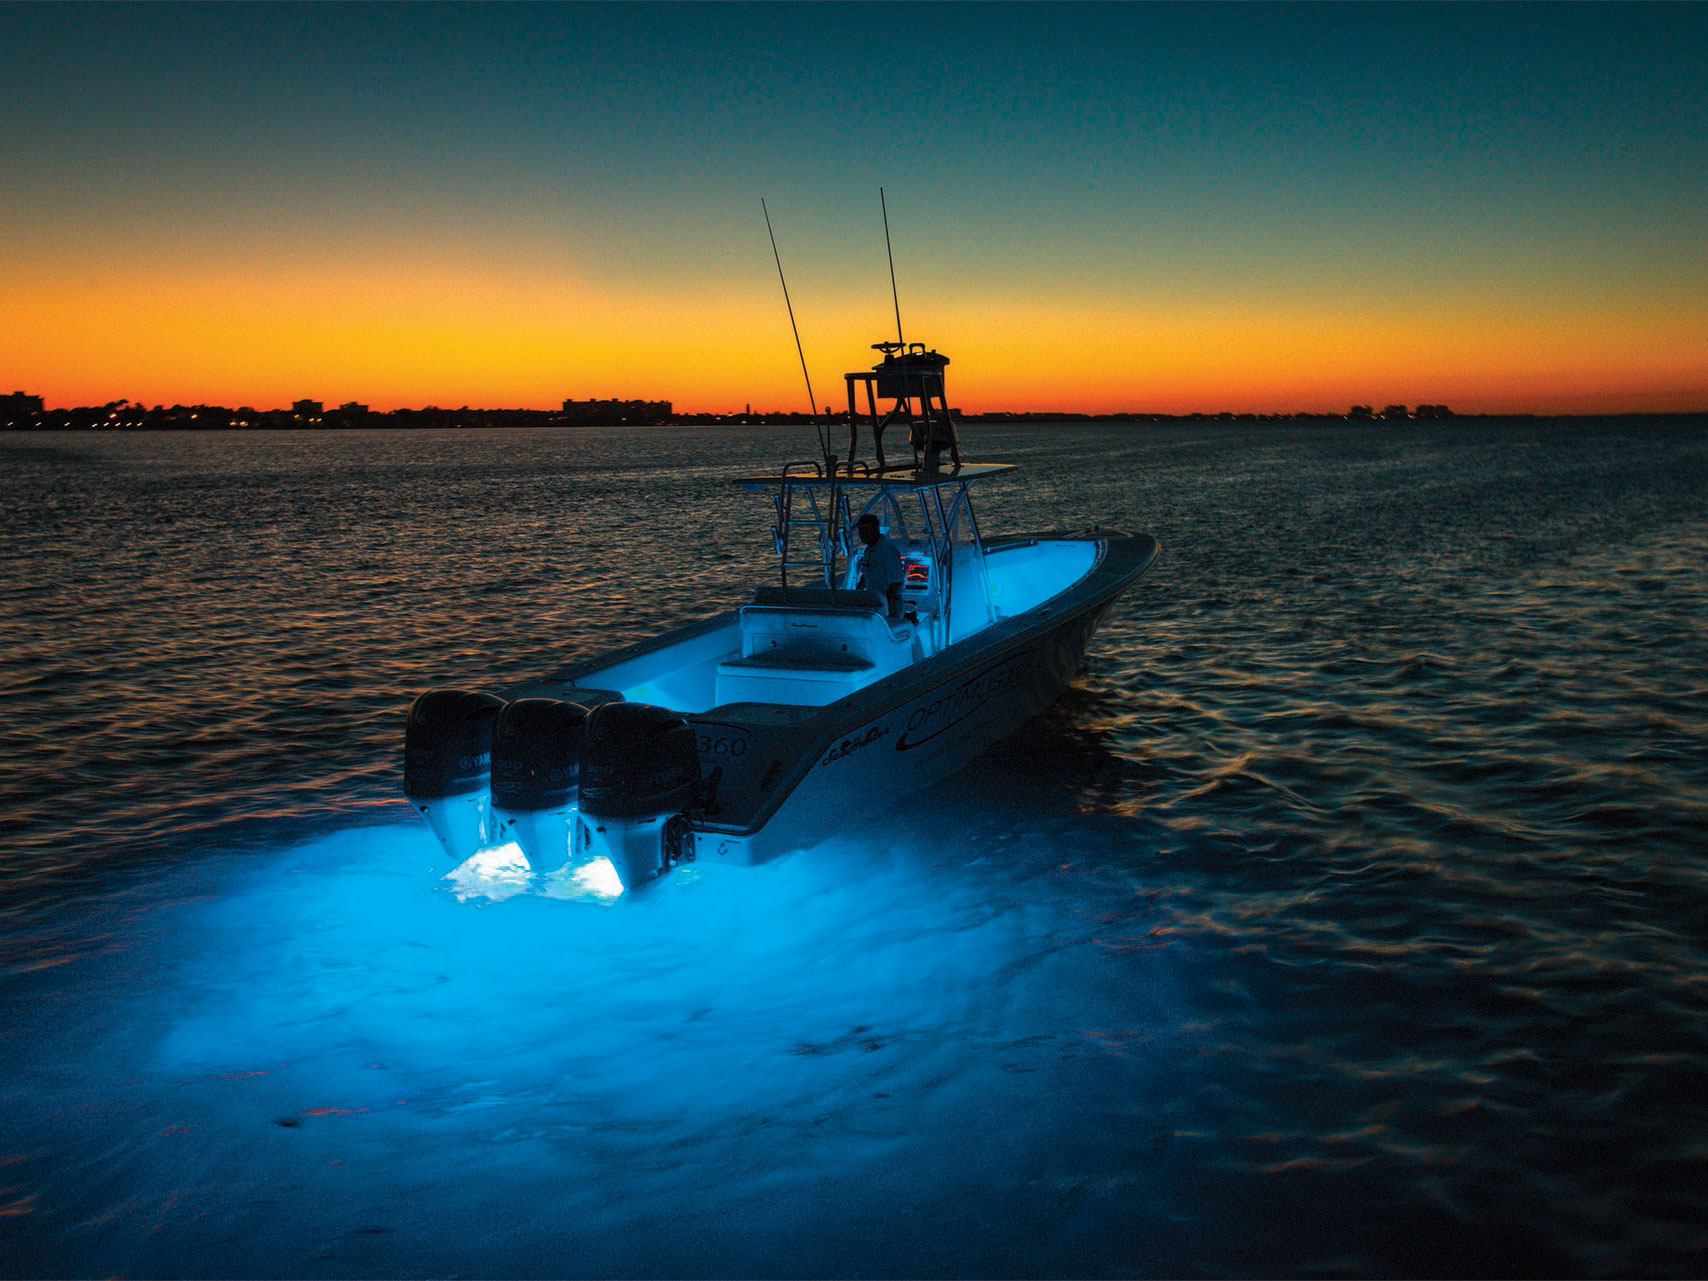 Benefits of Underwater Boat Lights For Fishing at Night